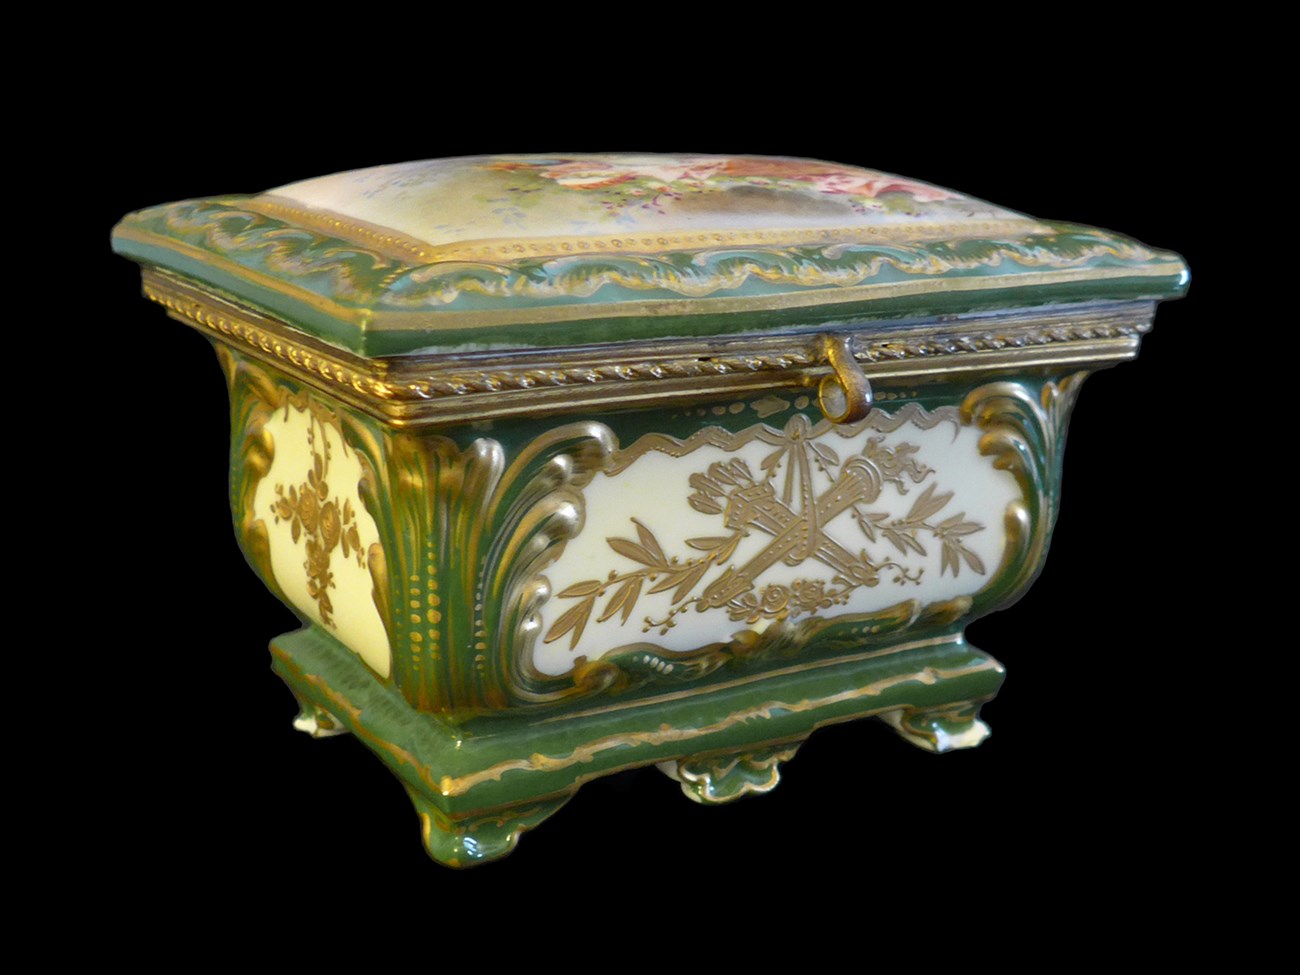 Ceramic lidded box decorated in cream, green, and gold